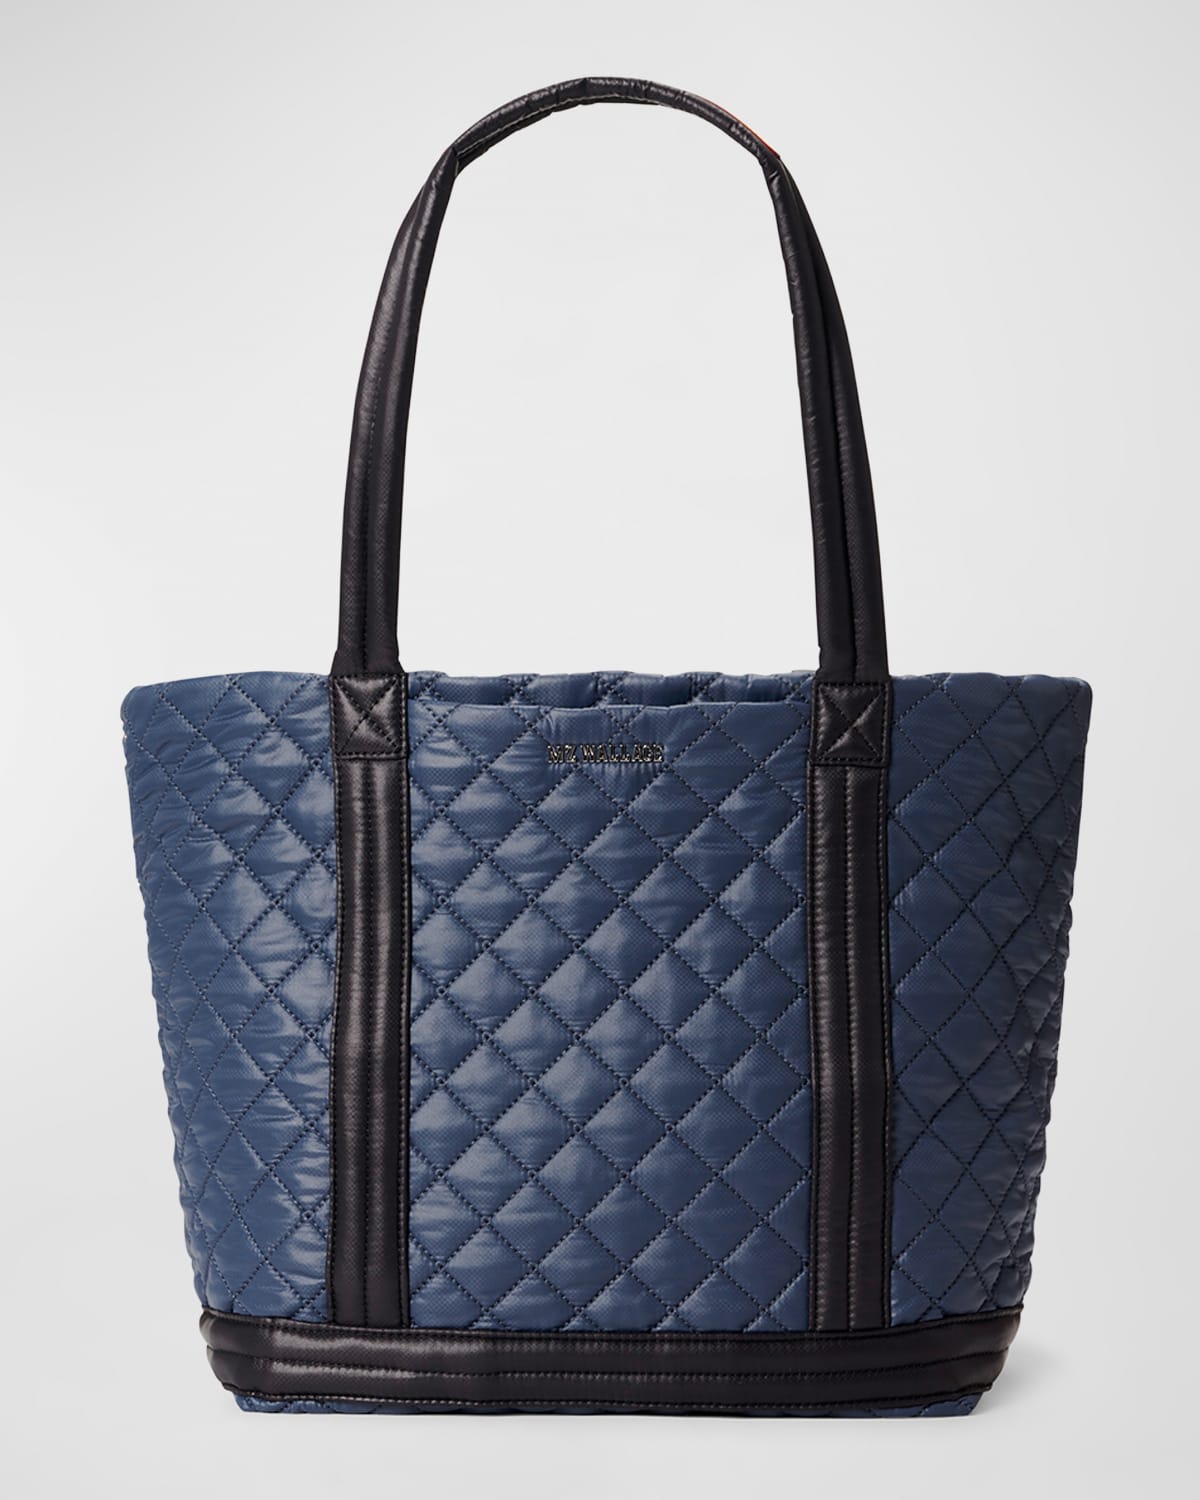 MZ WALLACE EMPIRE MEDIUM QUILTED TOTE BAG